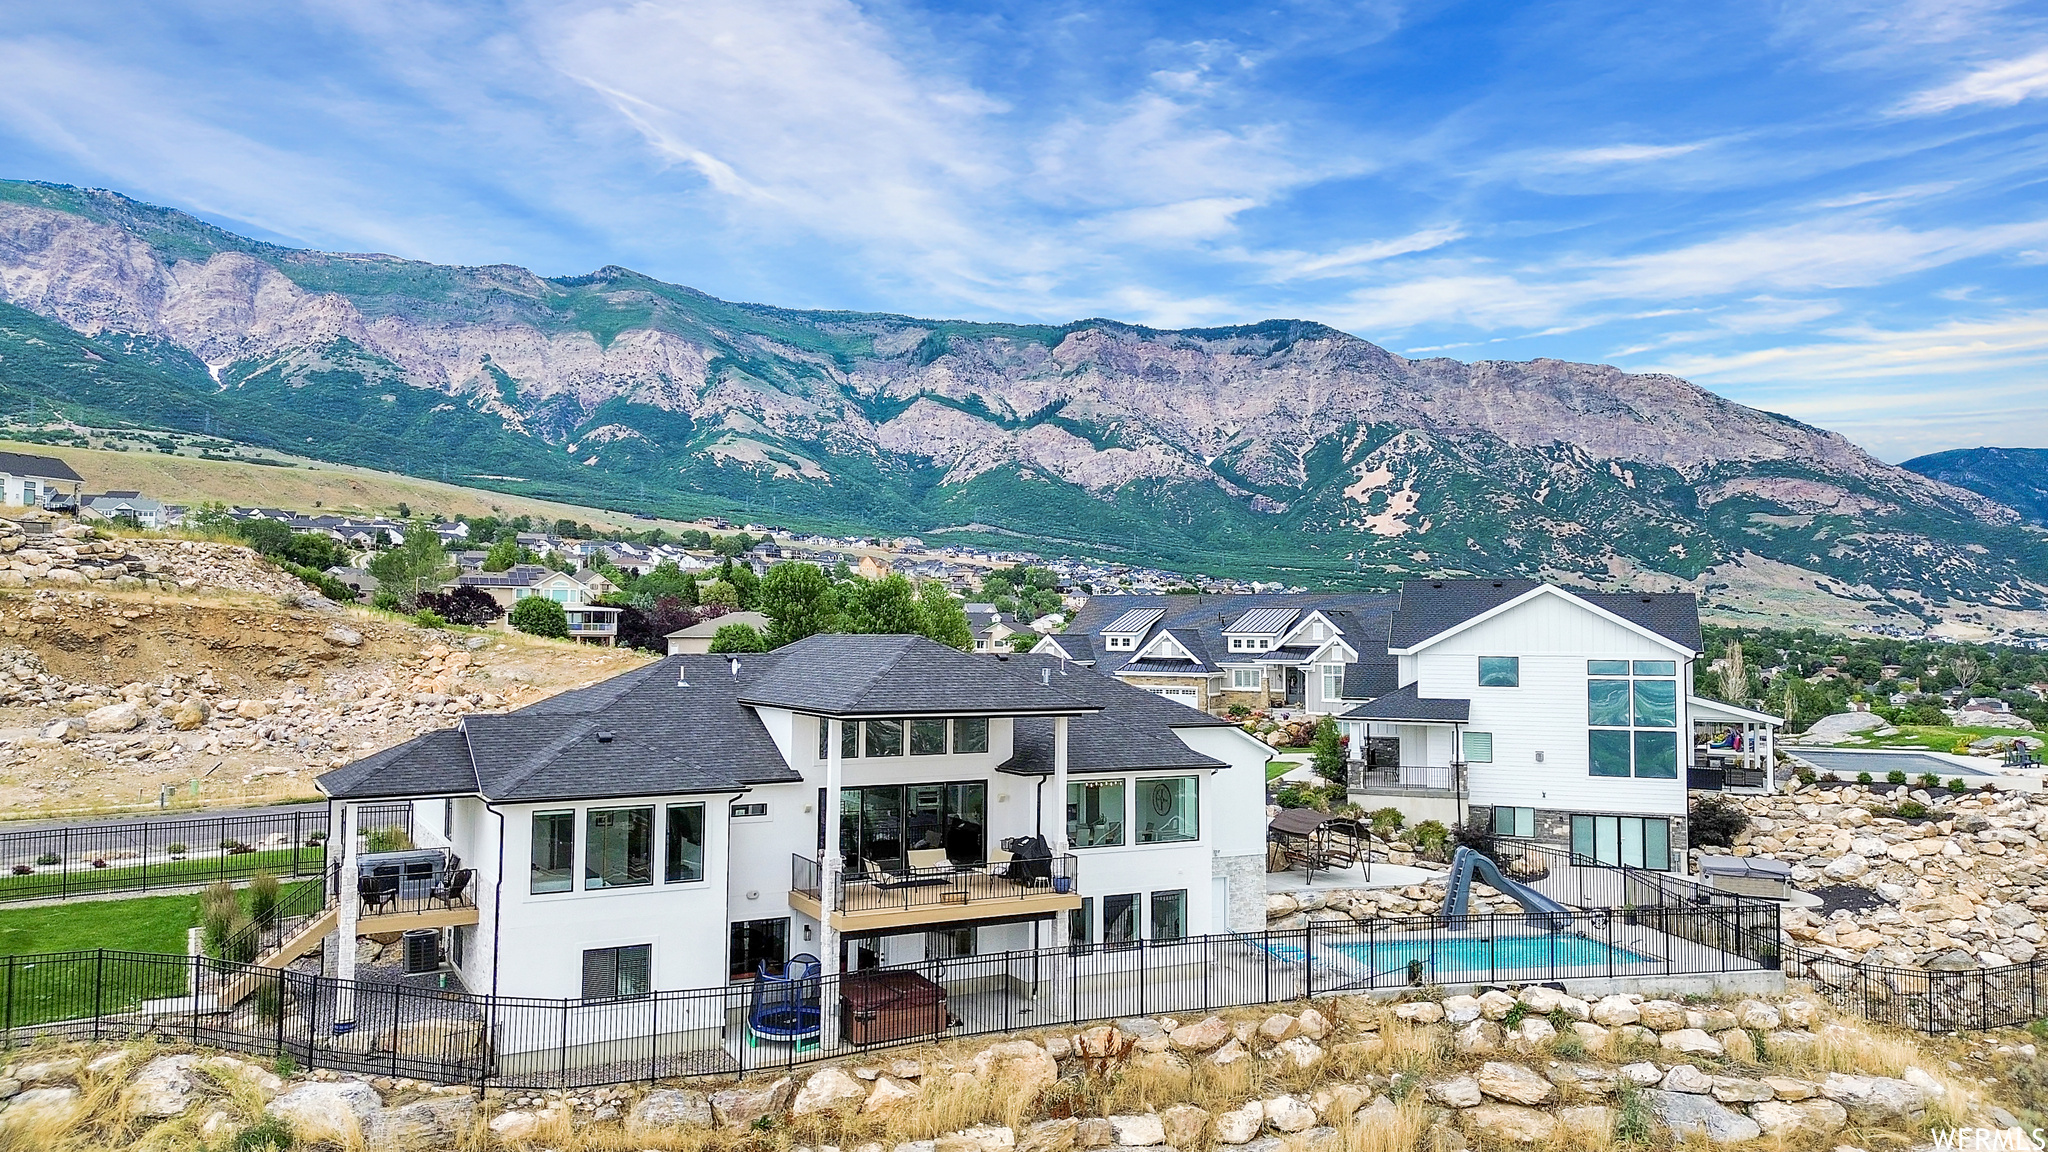 Property view of mountains featuring a swimming pool